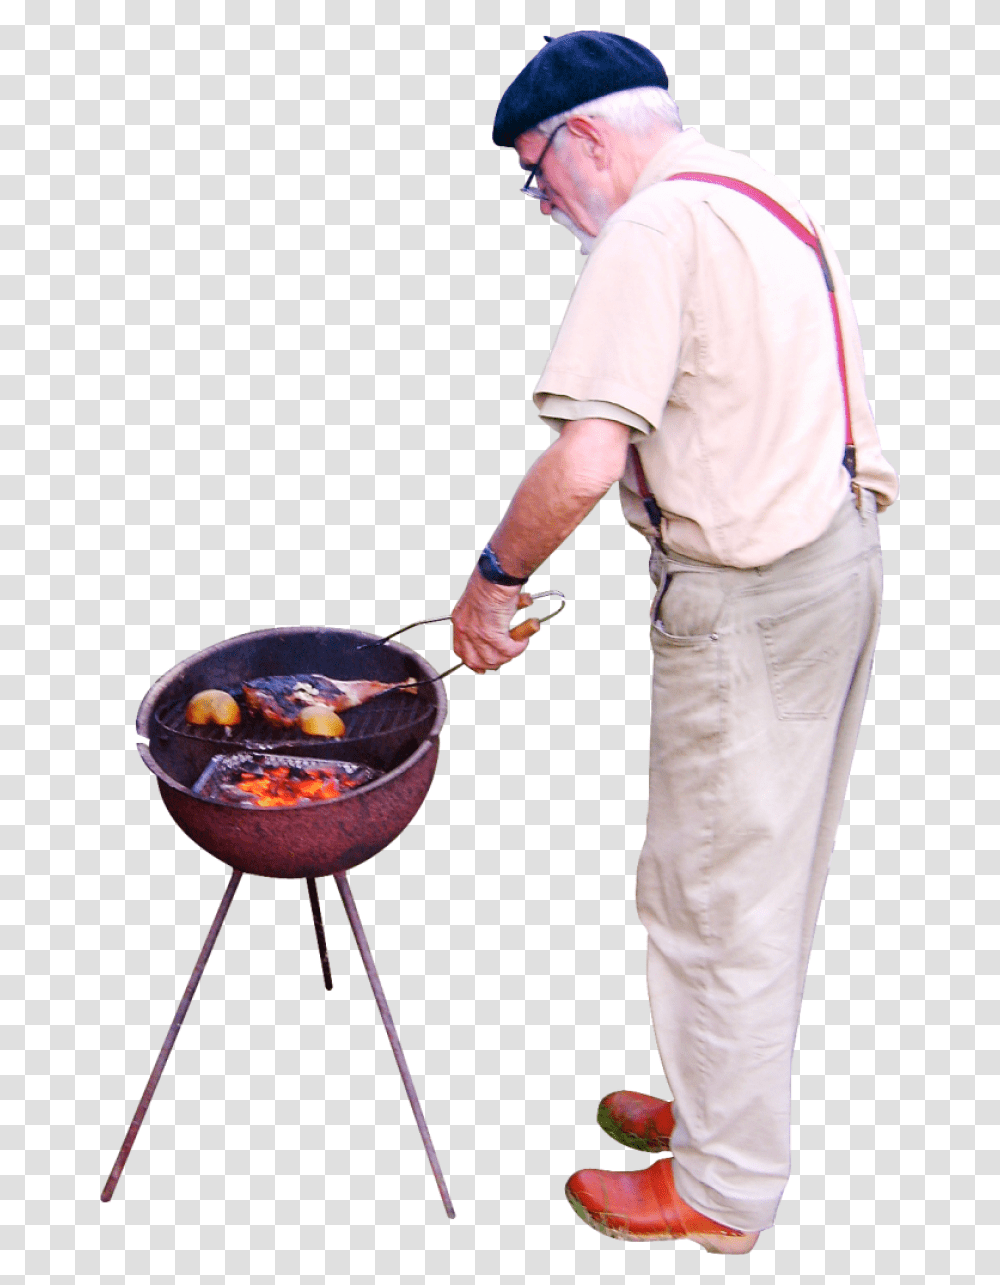 Download Bbq Image For Free People Grilling, Person, Food, Sleeve, Clothing Transparent Png